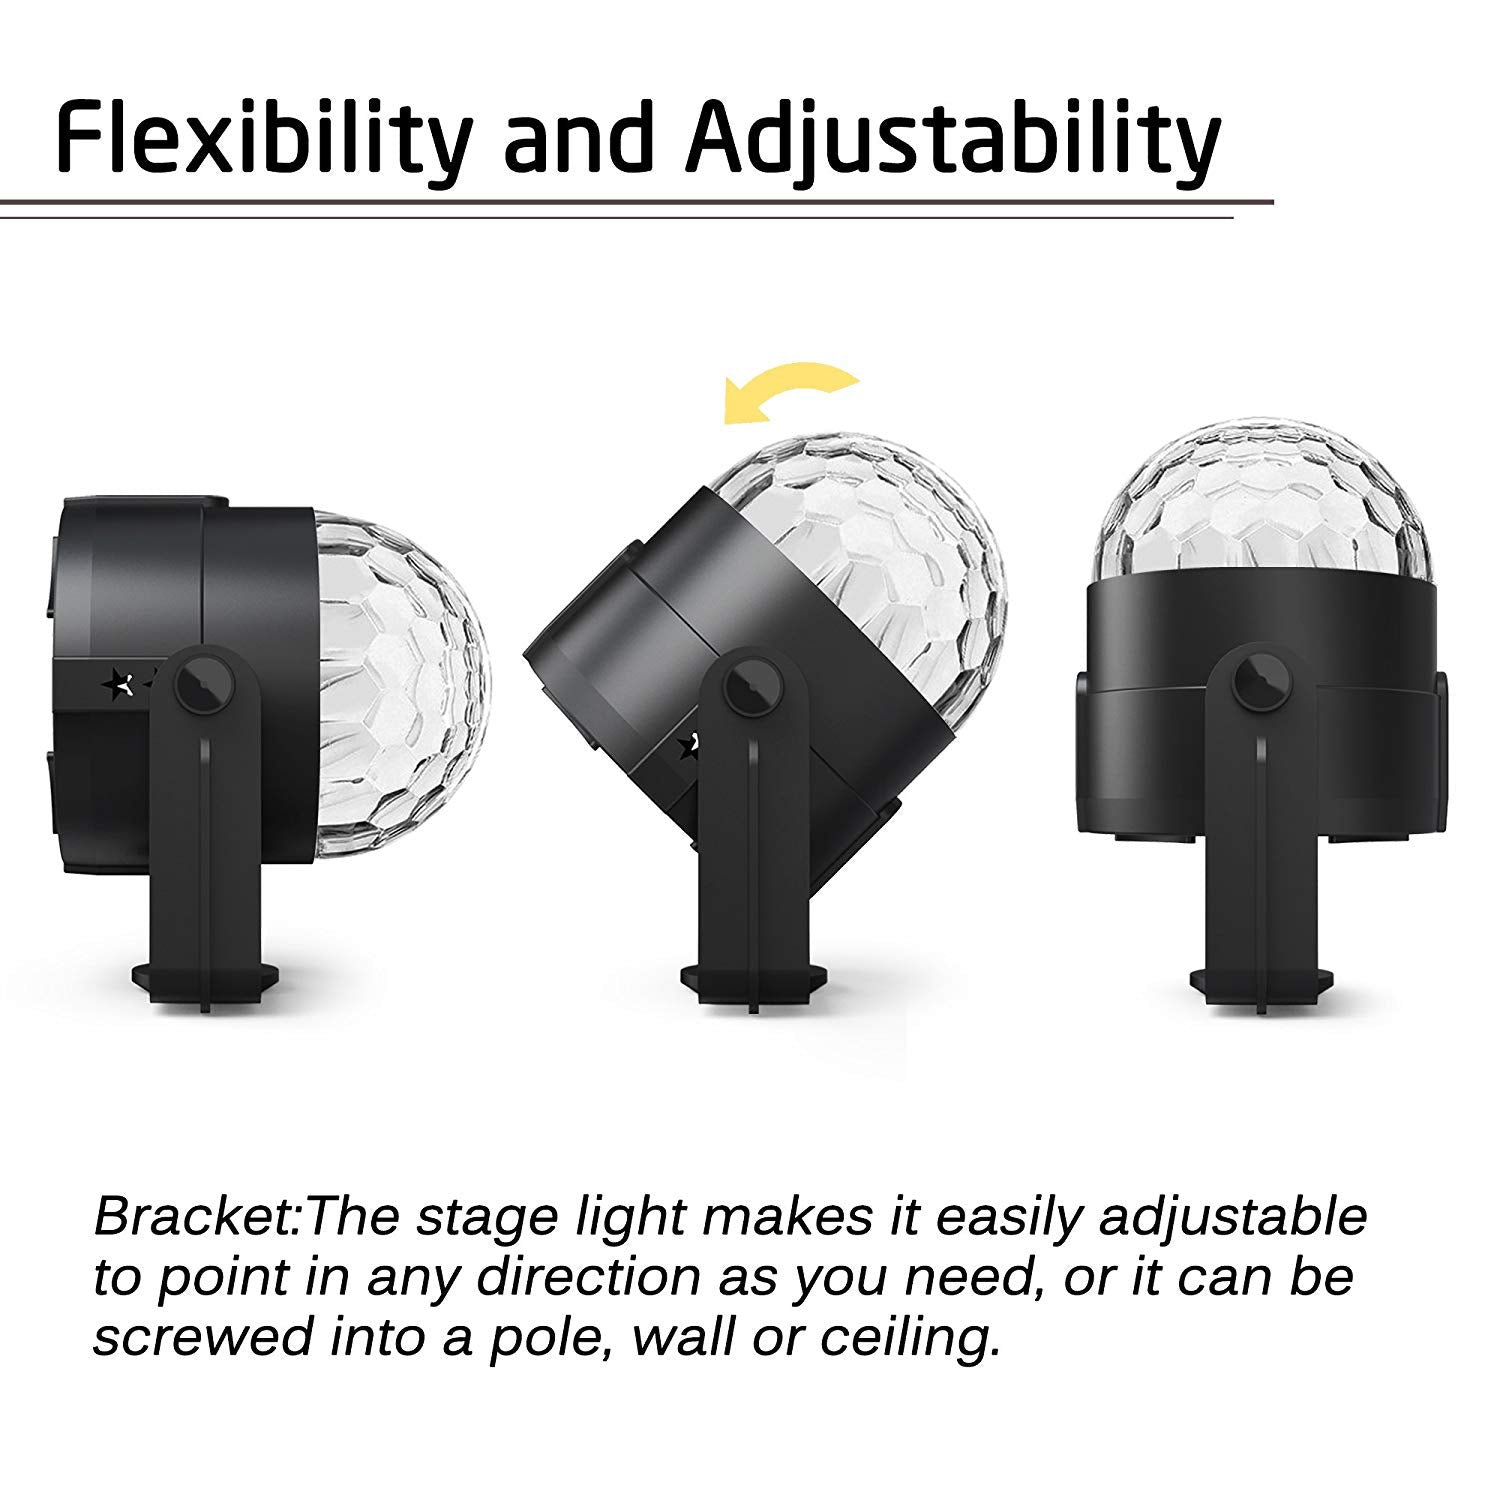 Sound Activated Music Party RGB Stage Light Lamp